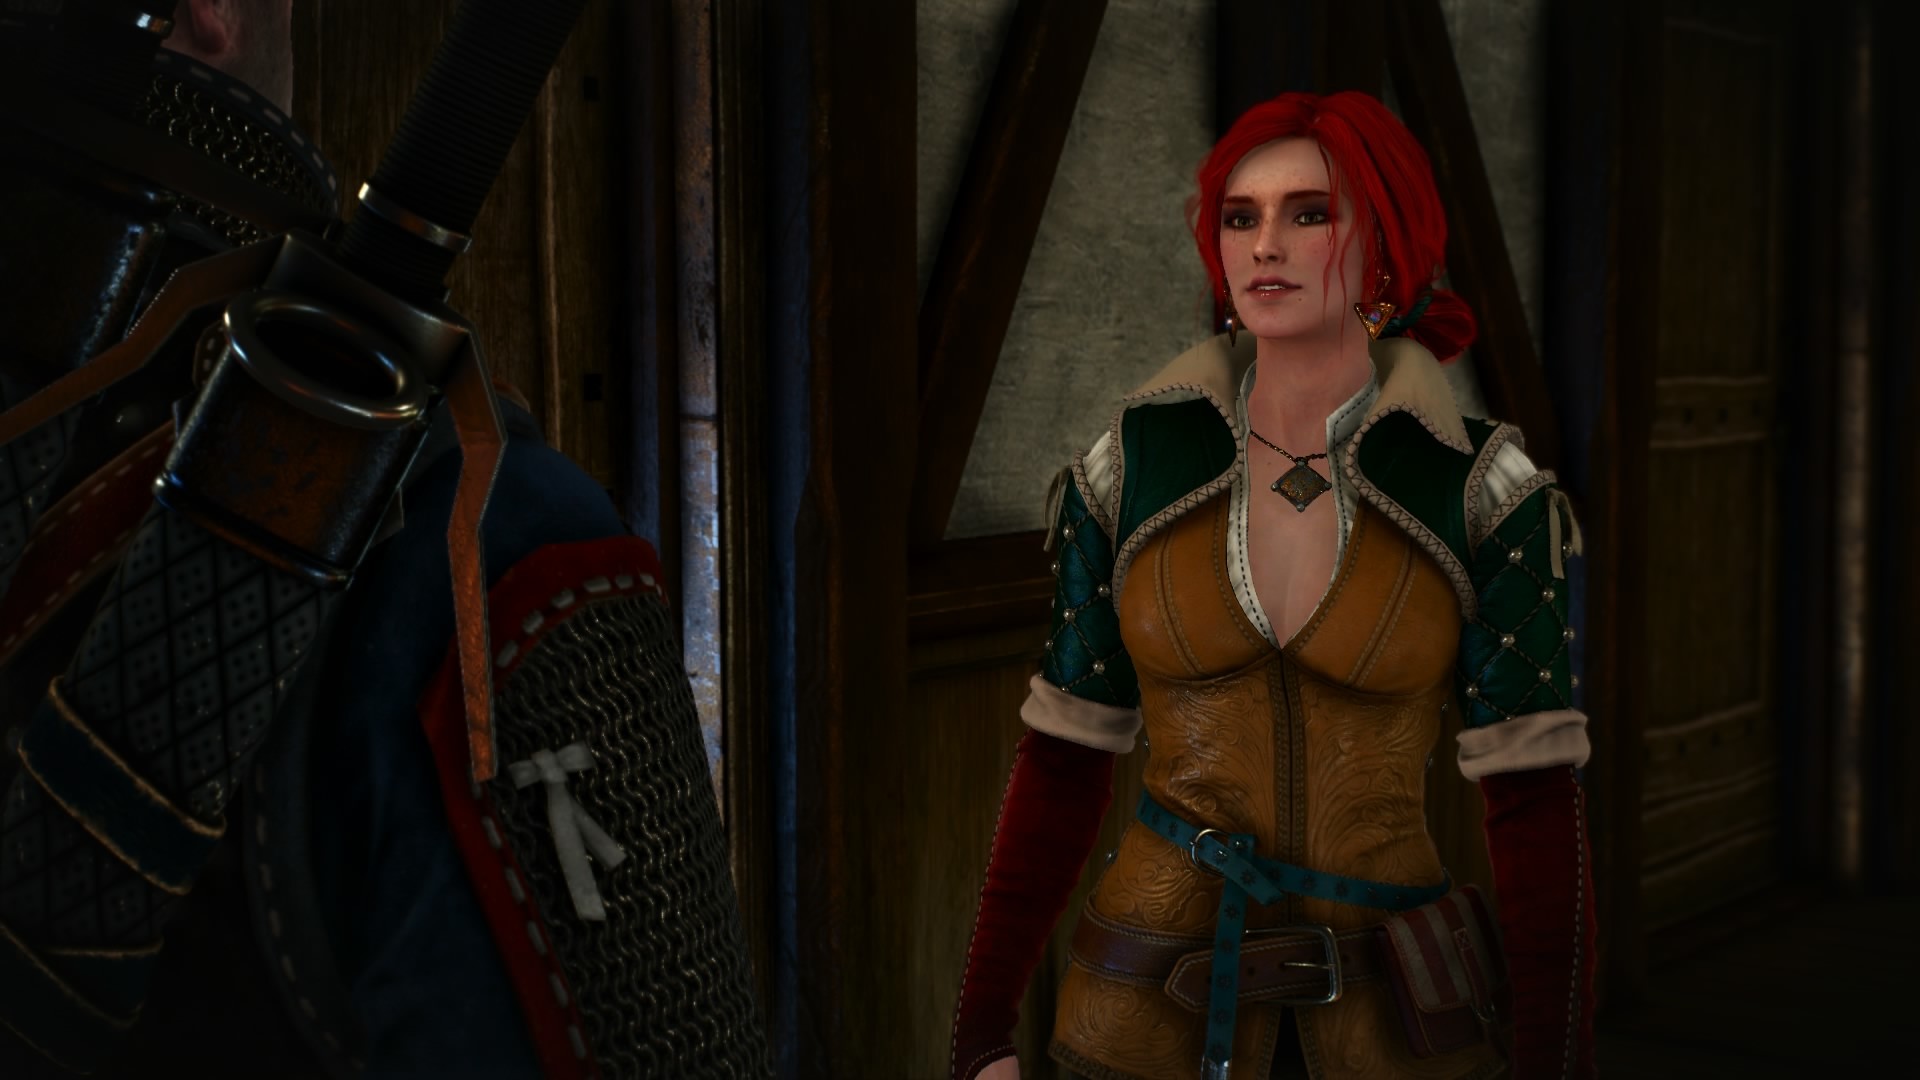 1920x1080 NO TRISS in FUTURE Can't even Imagine that. Only Expansion packs for TW3  can do add Triss content now